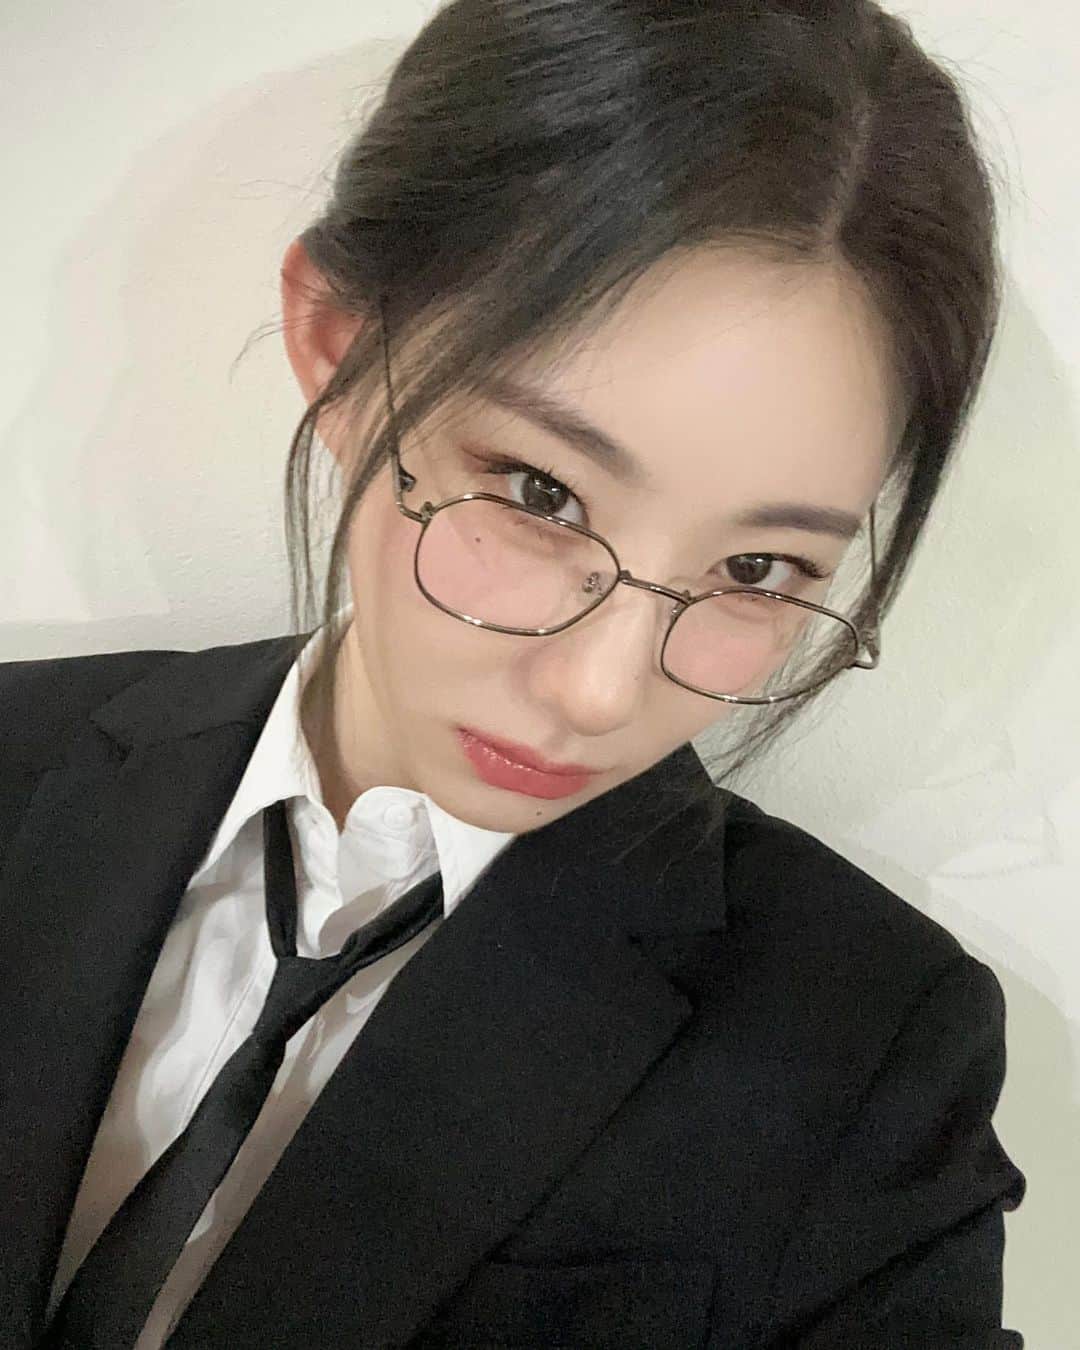 ITZYのインスタグラム：「[ #다섯플릭스 ] 치열했던 ITZY의 N분 토론🔥 다섯플릭스 다음 편도 많관부🖤  #ITZY #MIDZY #My_Favorite_ITZY @m2mpd」